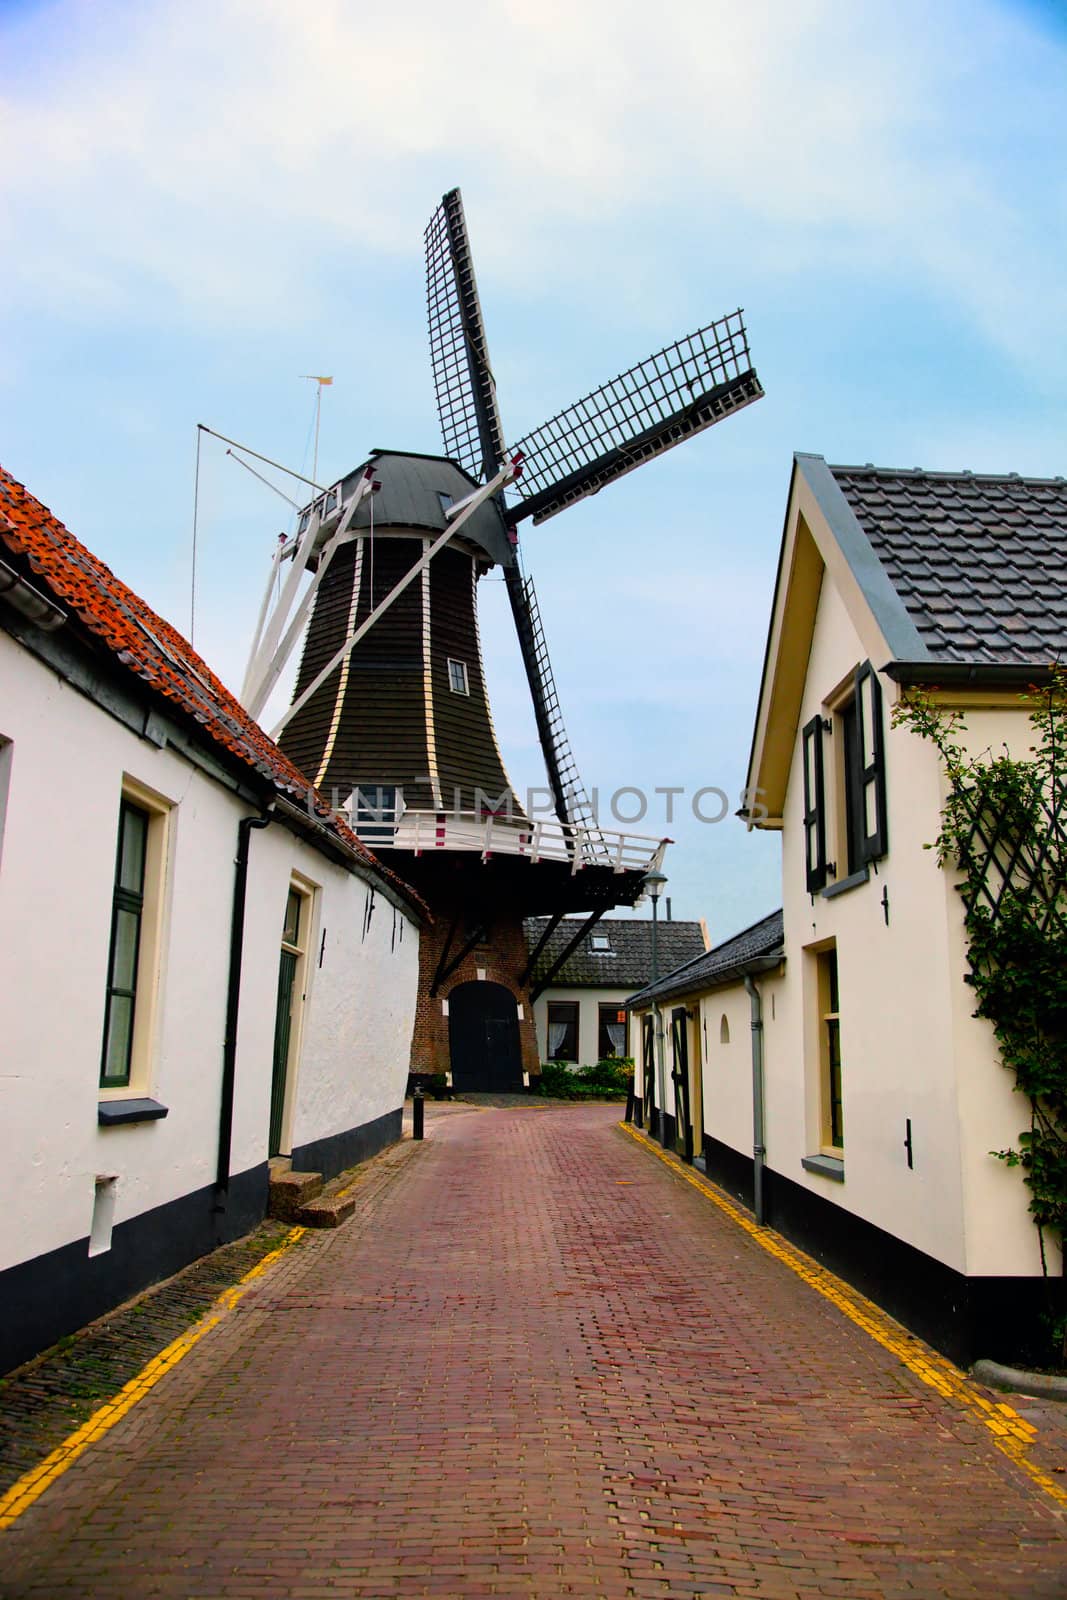 Windmill, historic architecture in small village in Holland, Netherlands